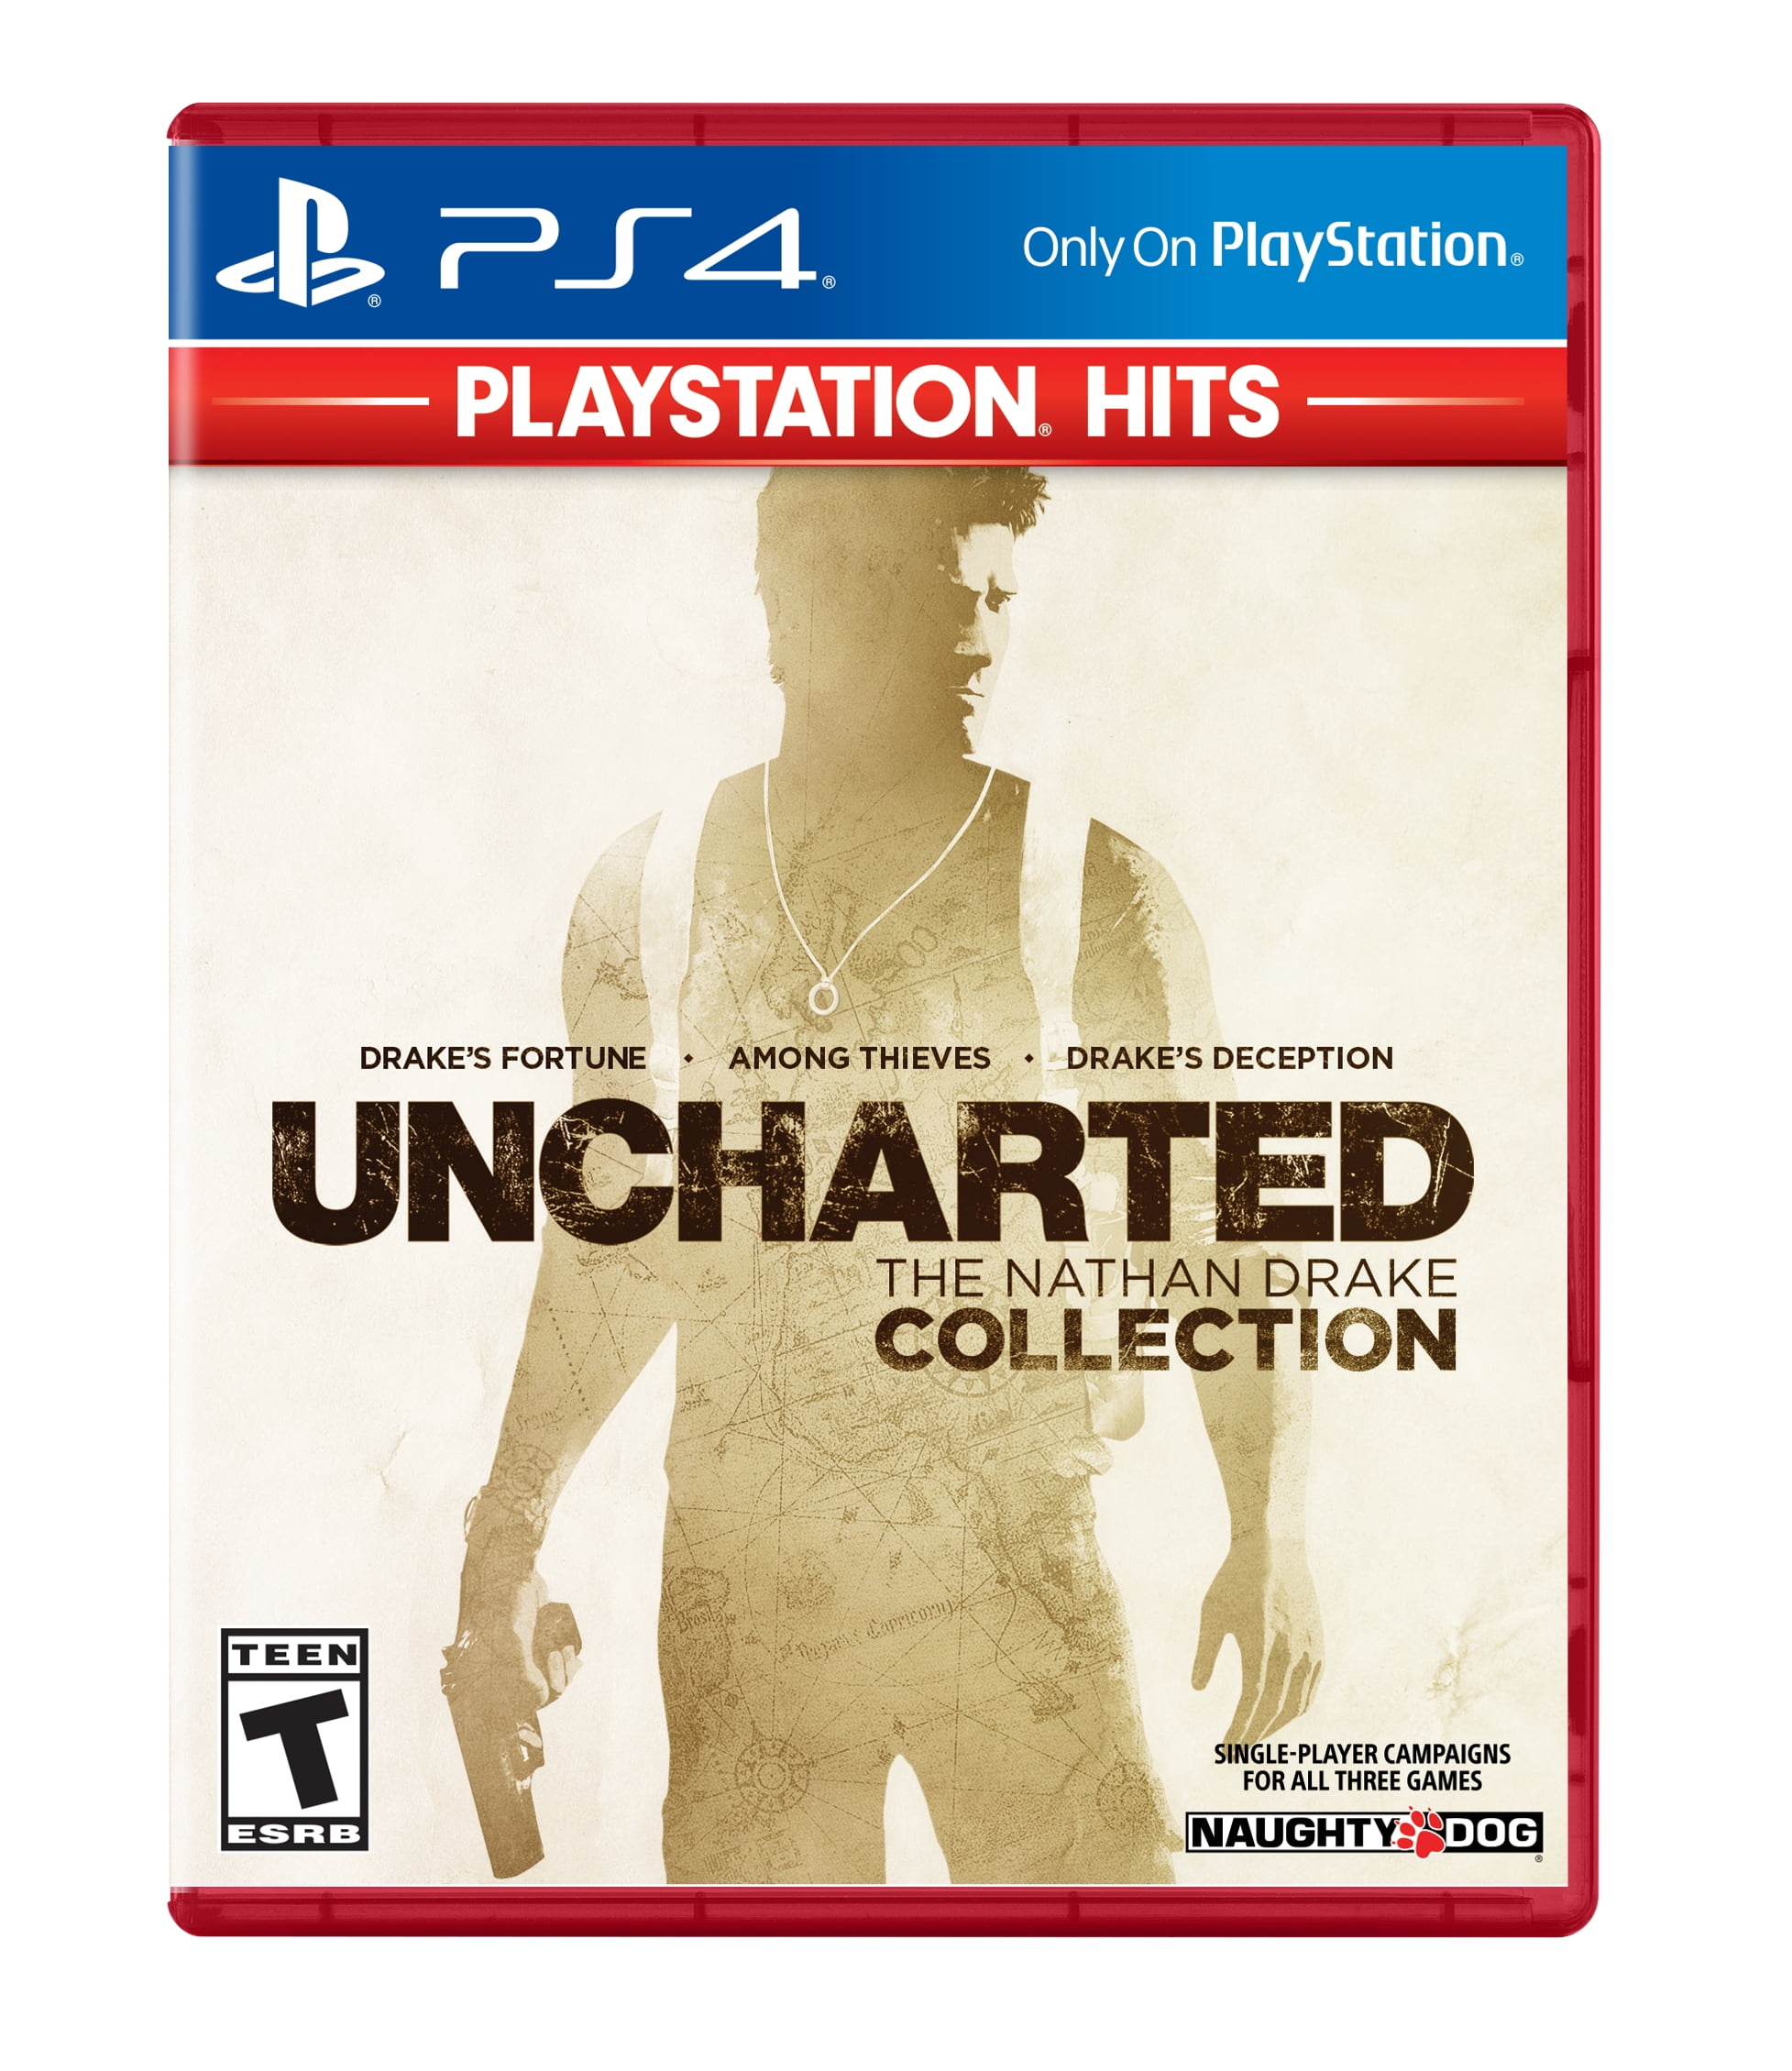 Uncharted' provides a fun adventure – Experience